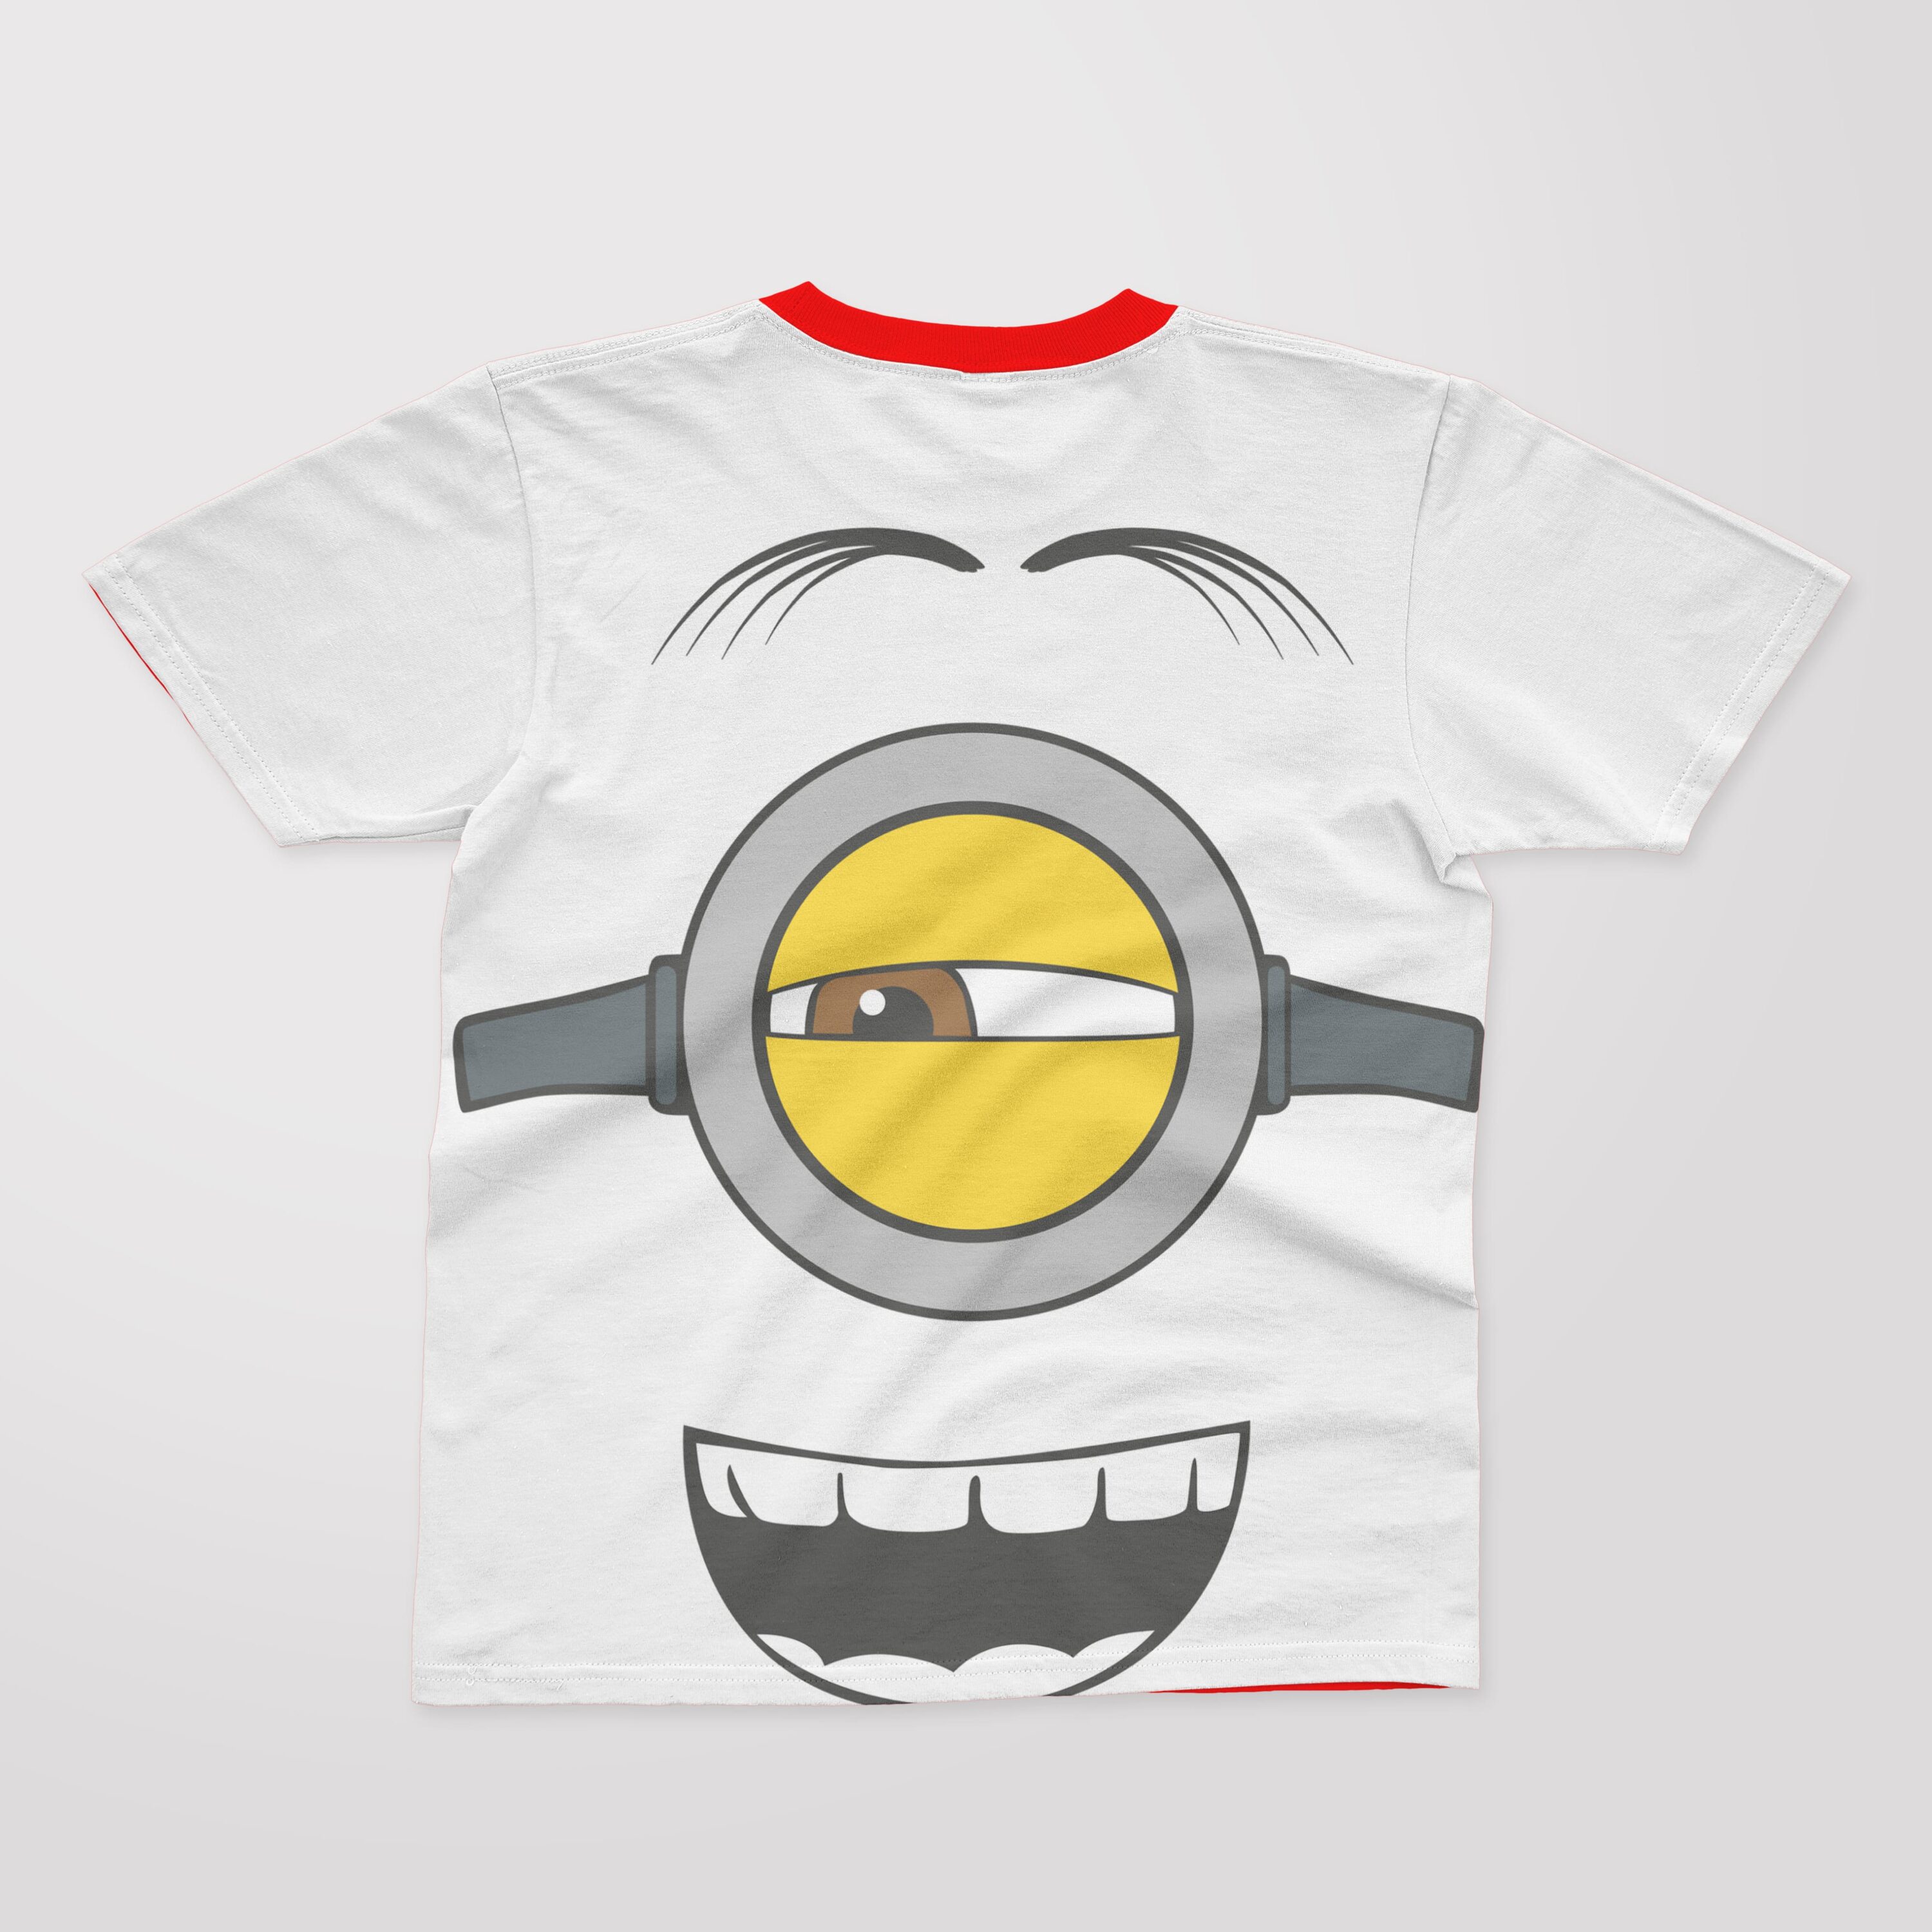 A white T-shirt with a red collar and a face of a laughing minion.